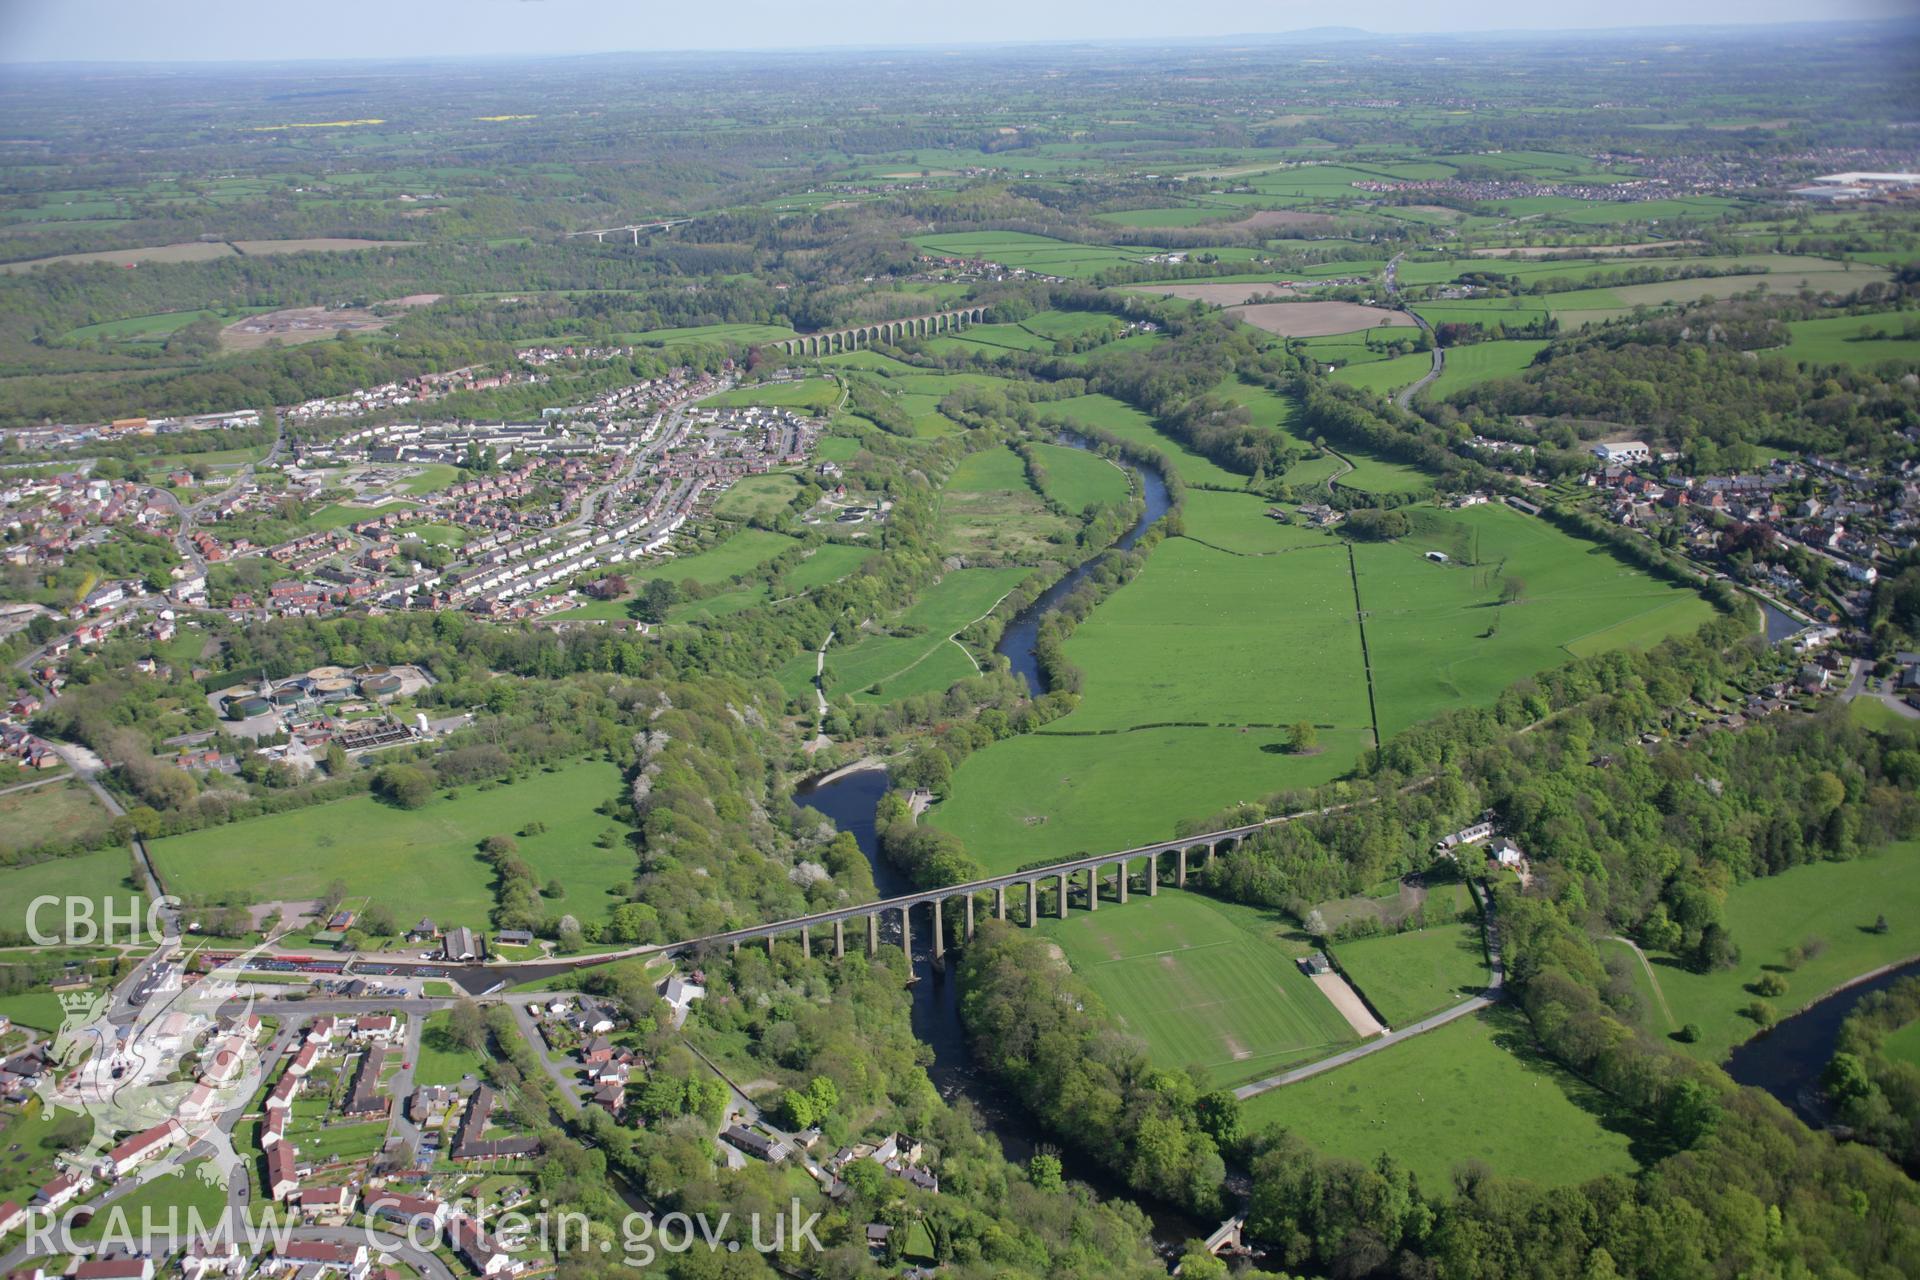 RCAHMW digital colour oblique photograph of Pontcysyllte Aqueduct from the north-west. Taken on 05/05/2006 by T.G. Driver.